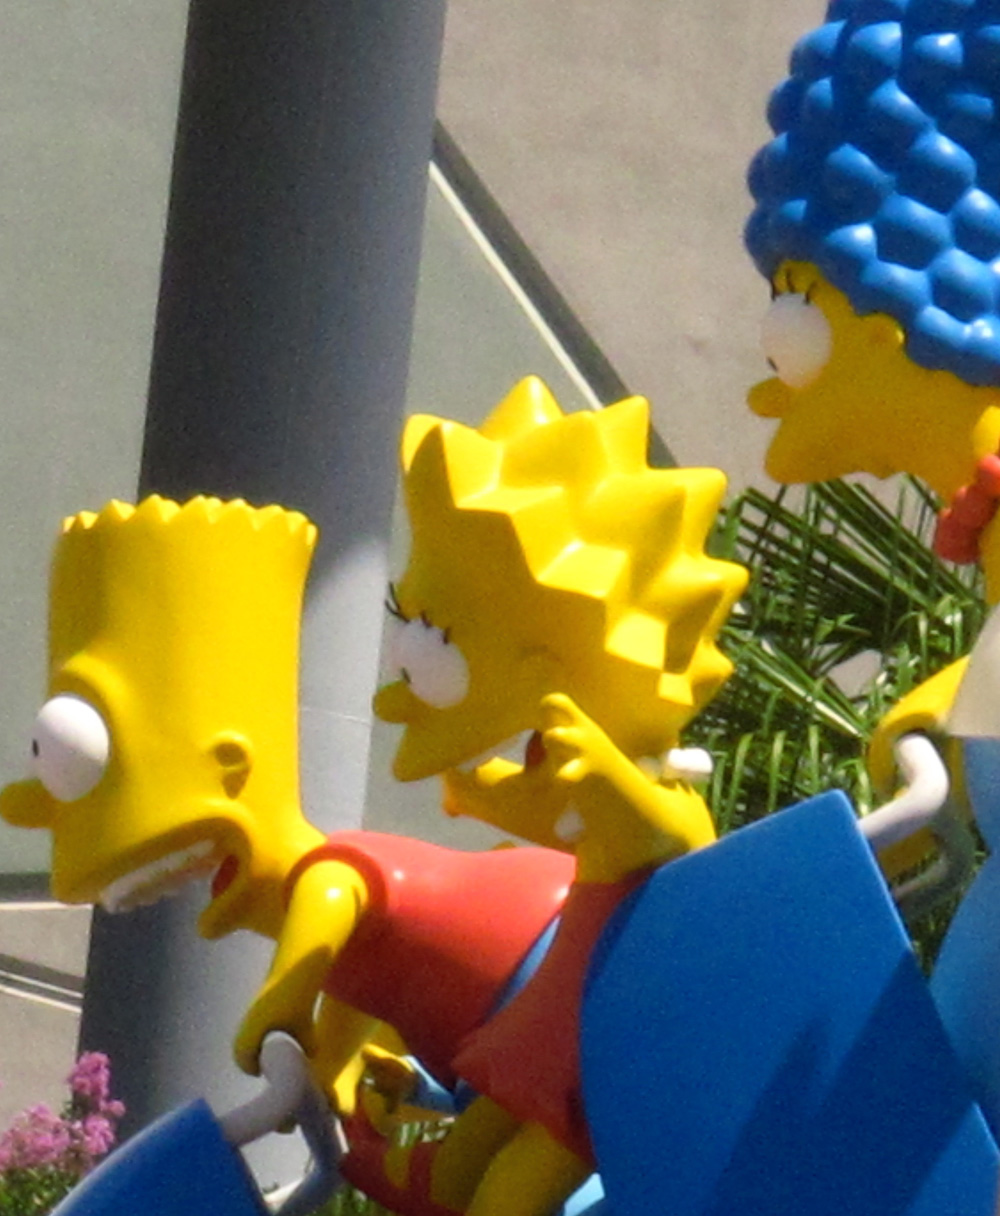 The Simpsons on a rollercoaster